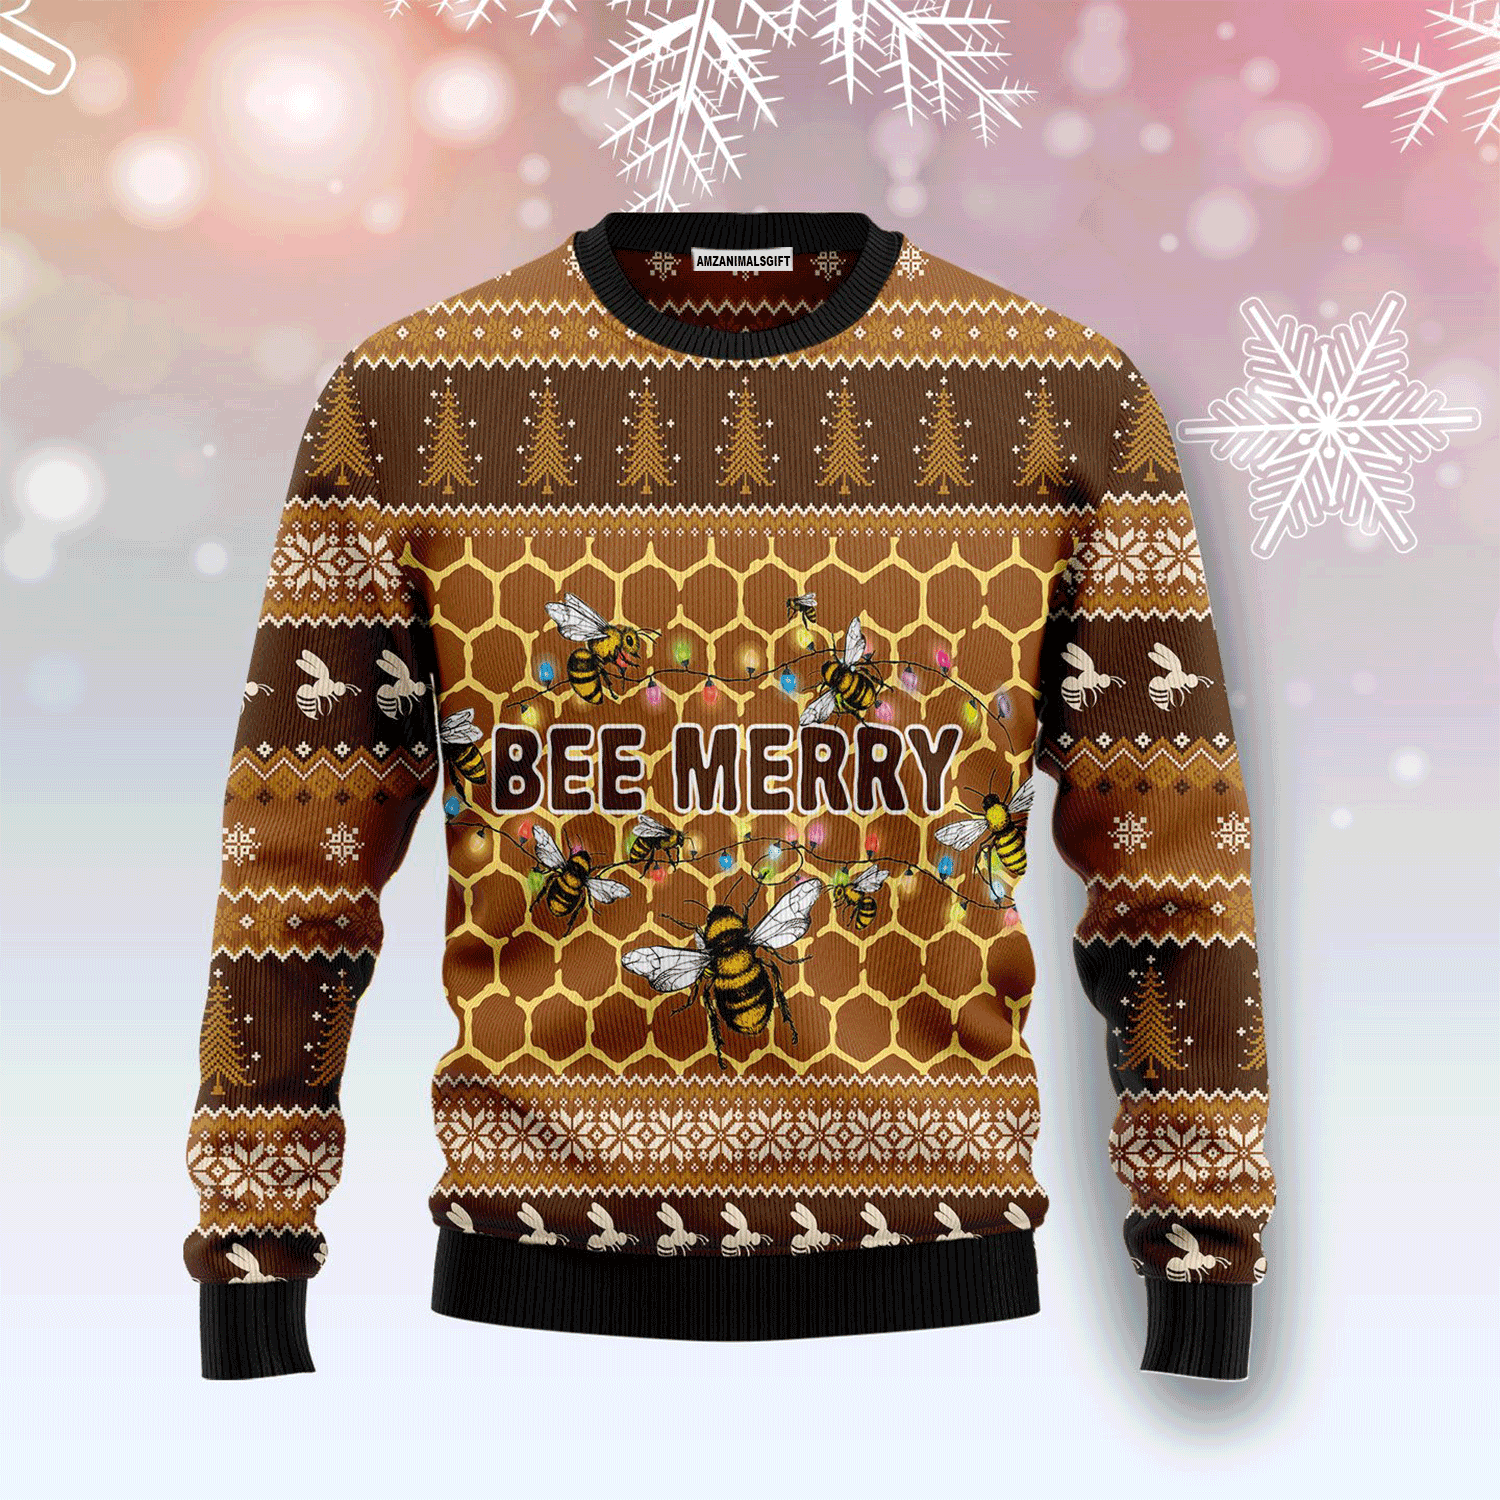 Bee Merry Sweater, Ugly Christmas Sweater For Men & Women, Perfect Outfit For Christmas New Year Autumn Winter